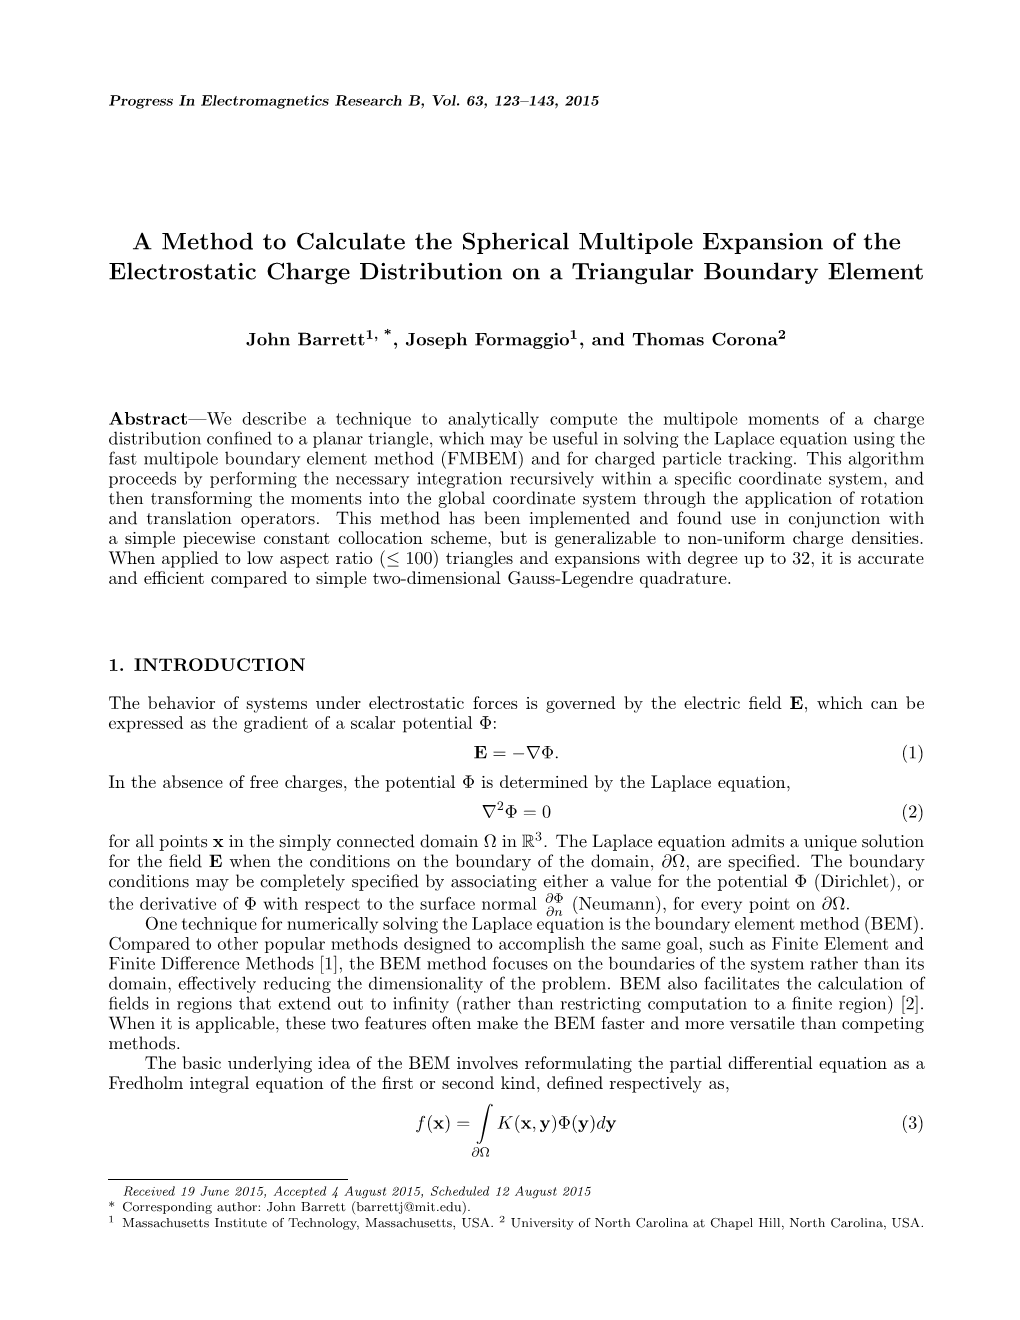 A Method to Calculate the Spherical Multipole Expansion of the Electrostatic Charge Distribution on a Triangular Boundary Element